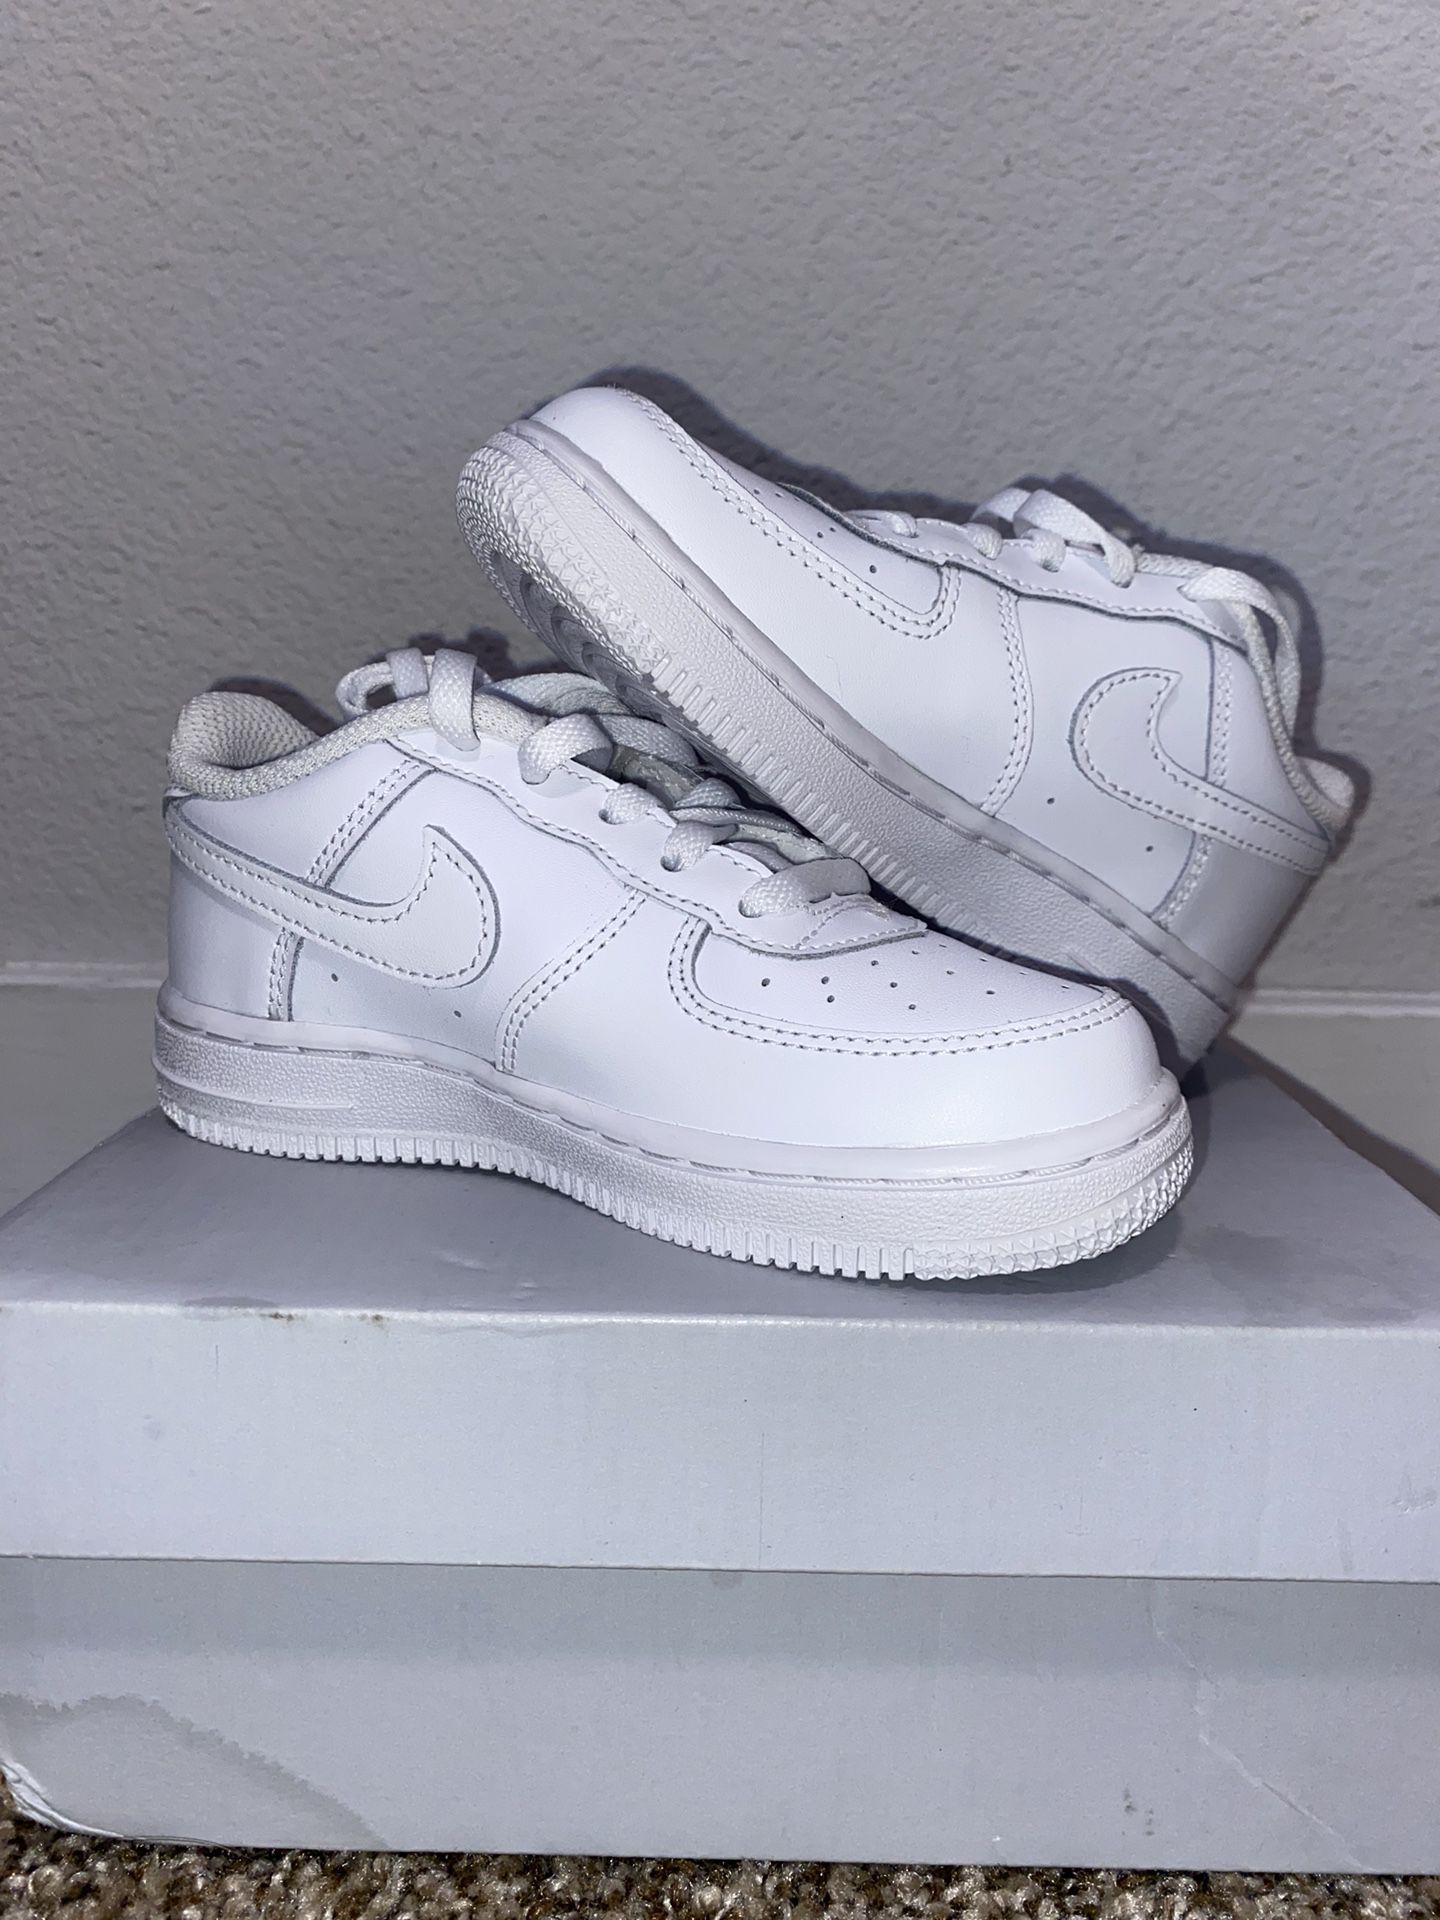 Air Force One Lows Size 9c